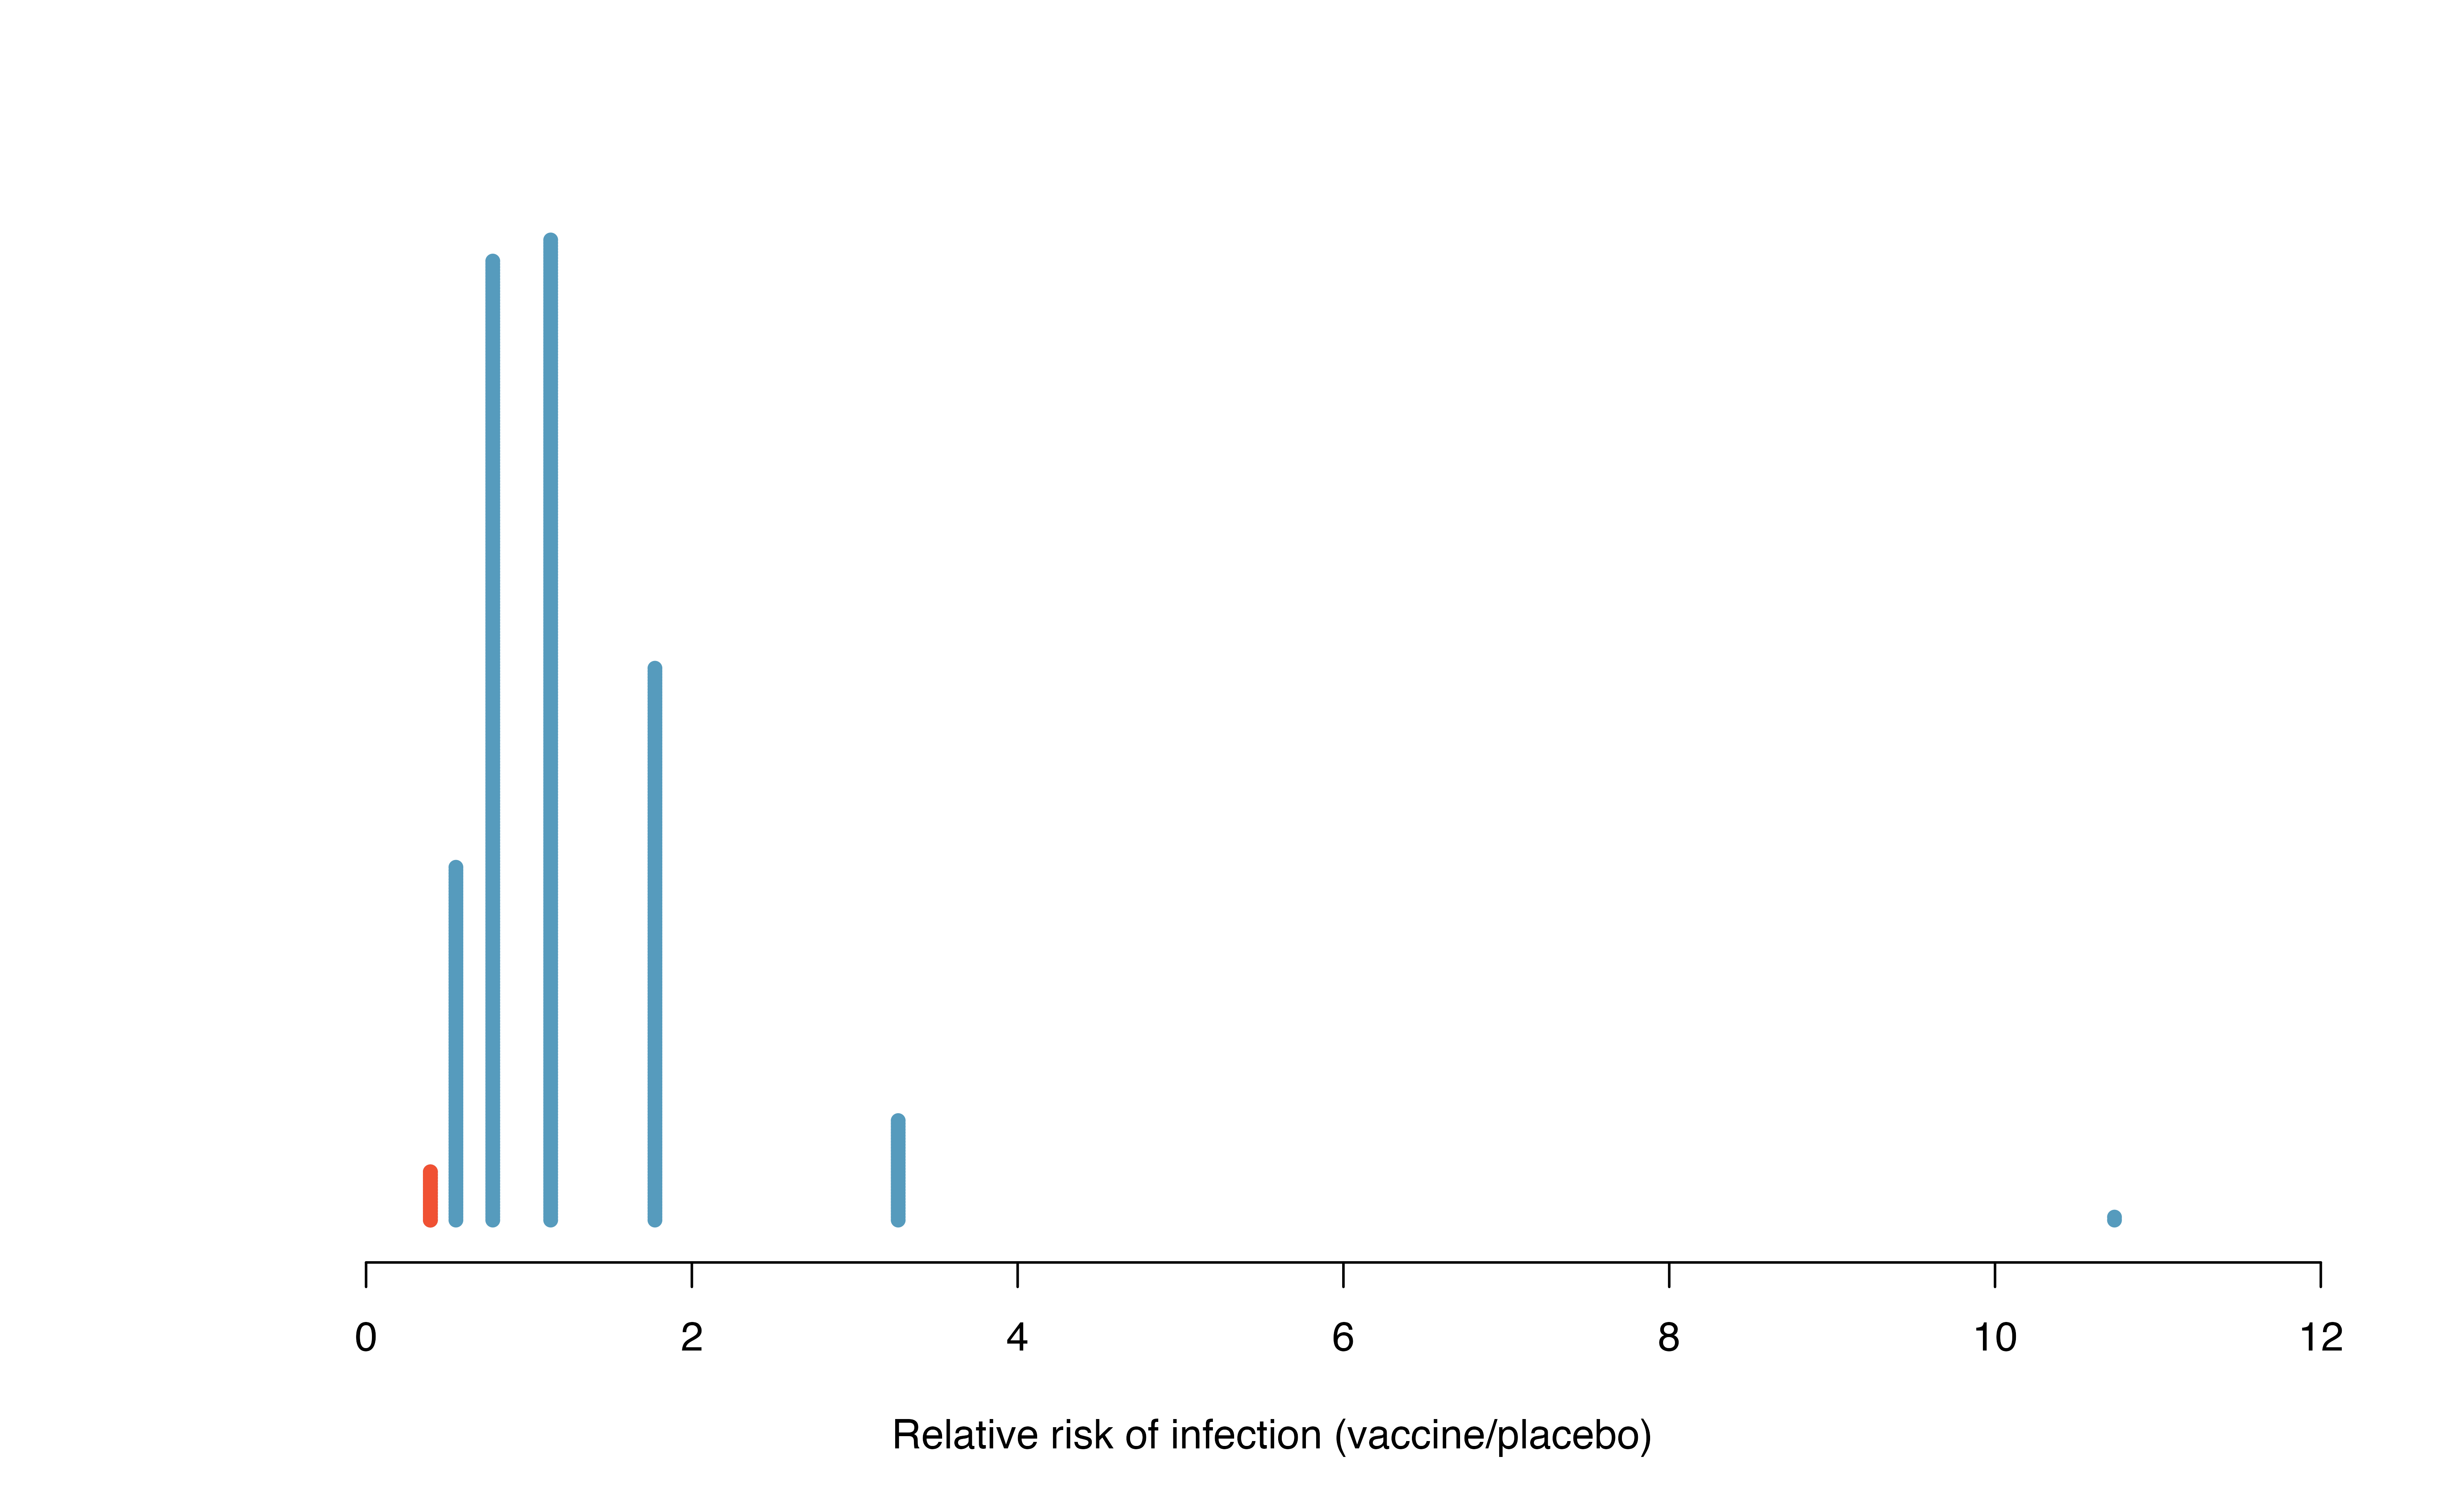 A histogram of relative risks of infection from 1,000 simulations produced under the independence model $H_0$, where in these simulations infections are unaffected by the vaccine. Seventeen of the 1,000 simulations (shaded in red) had a relative risk of at most 0.357, the relative risk observed in the study.